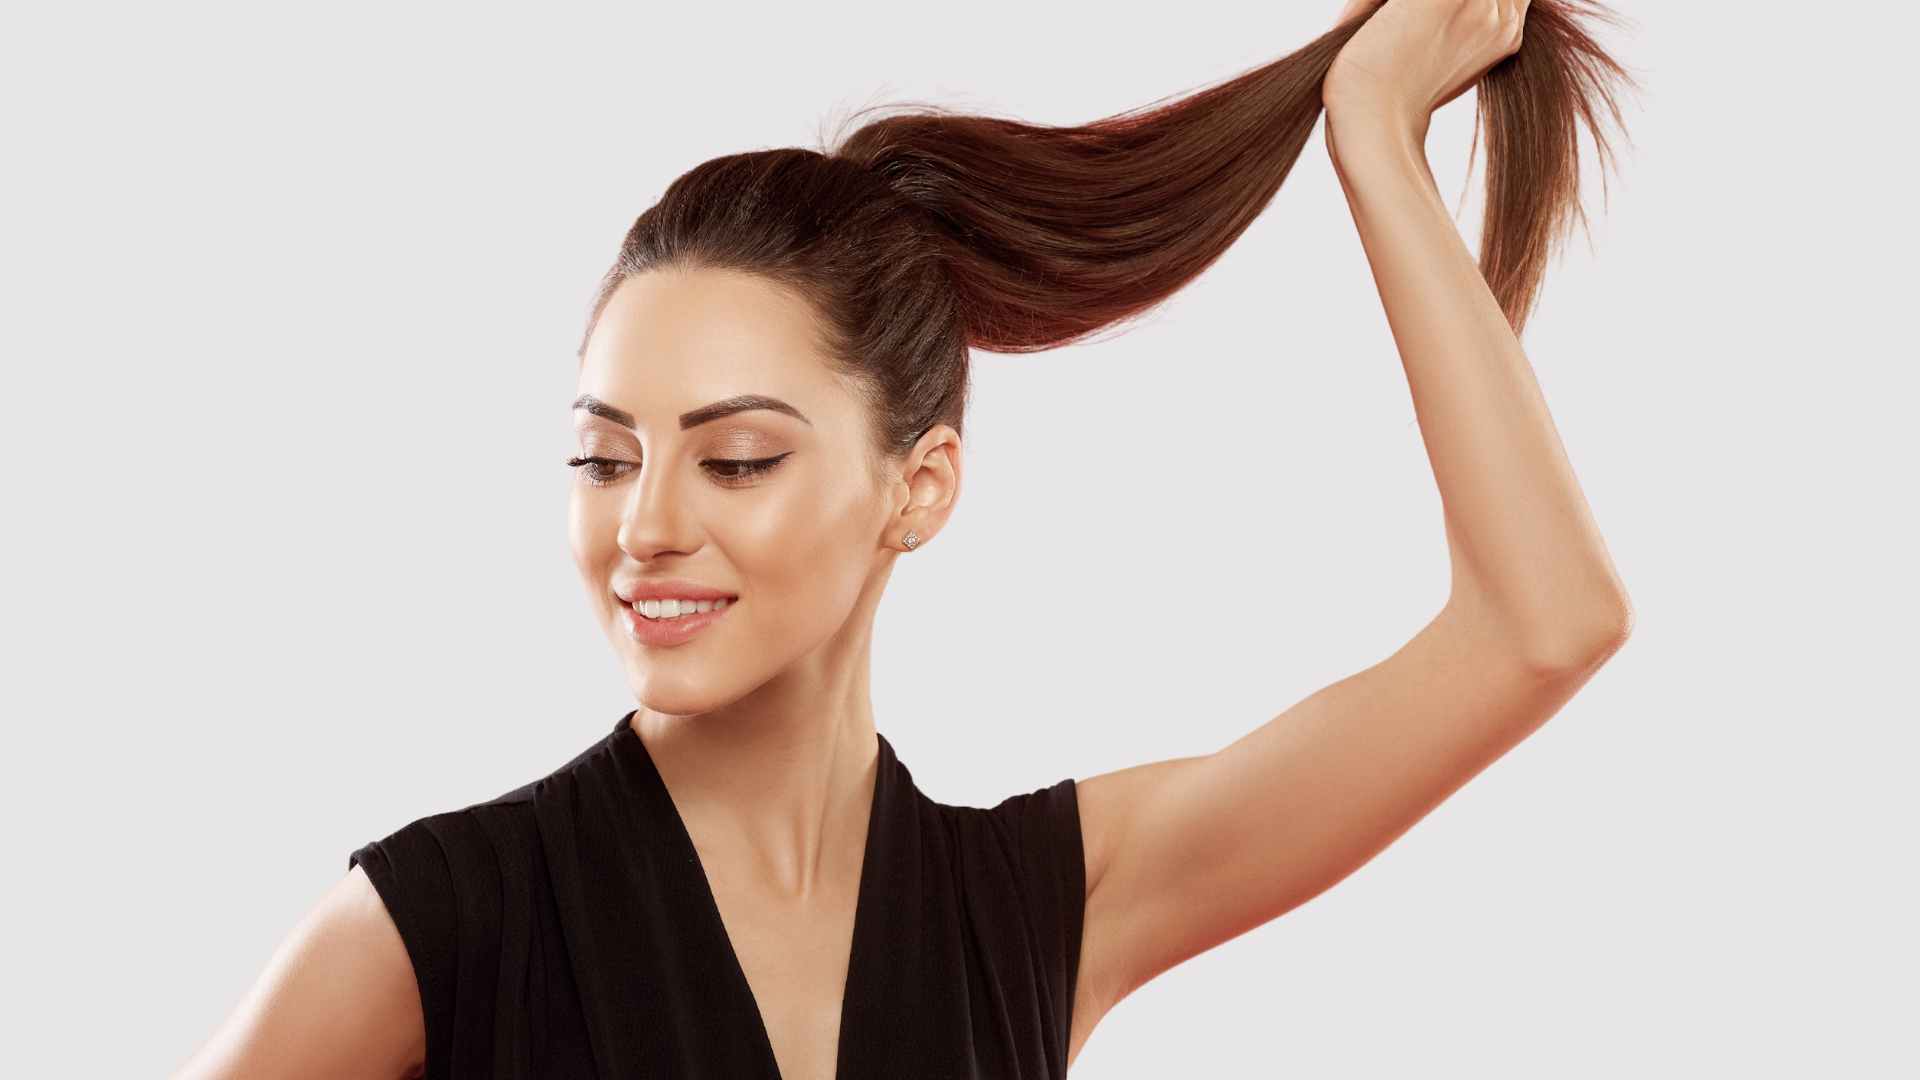 Damaged Hair: Female with hair in pony tail, damage at the ends of hair